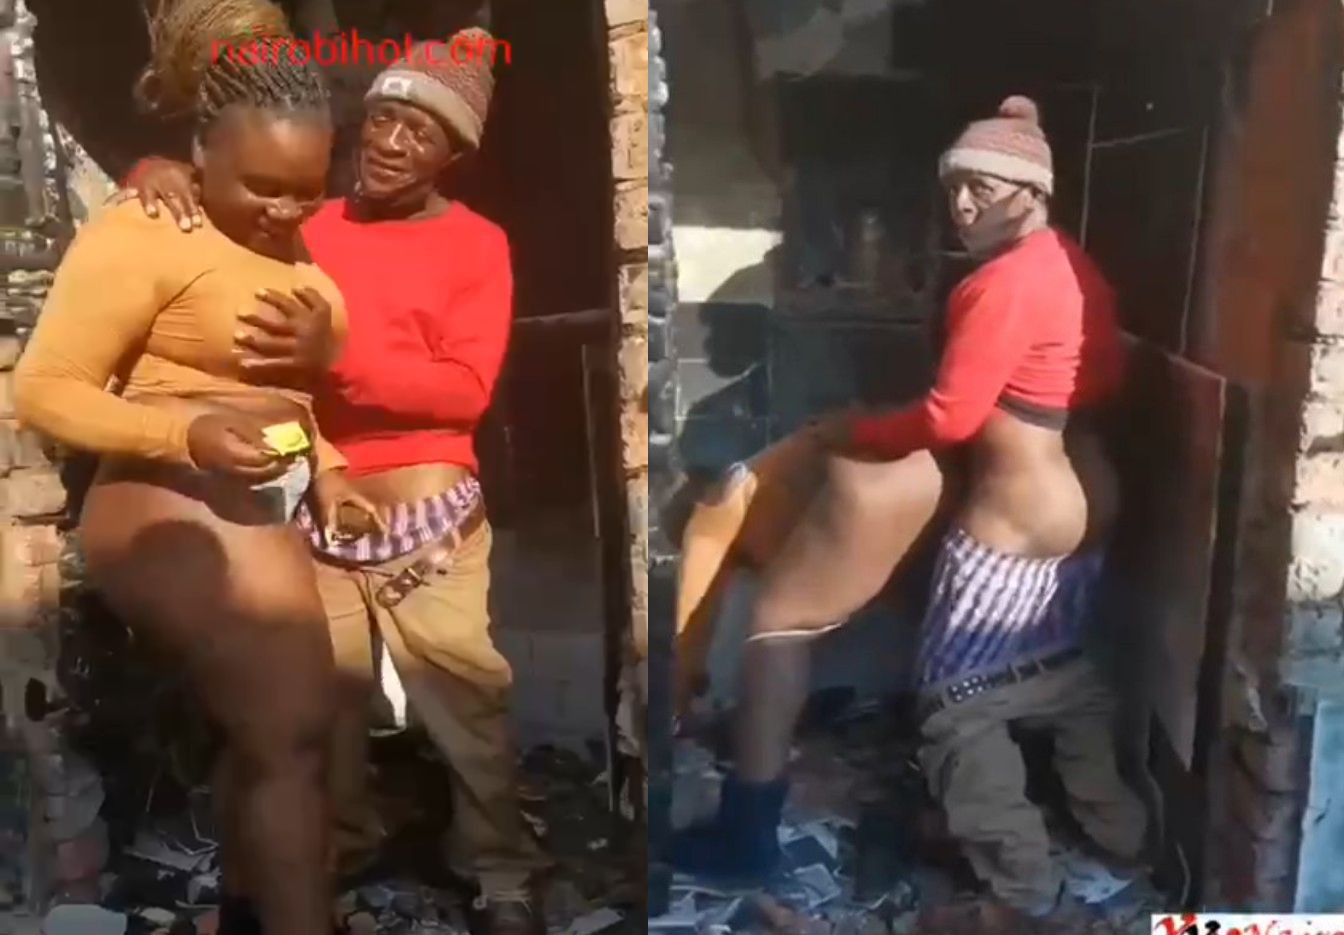 Crazy Old Man Having Doggy Sex With African Prostitute With Big Ass In Public (18+)